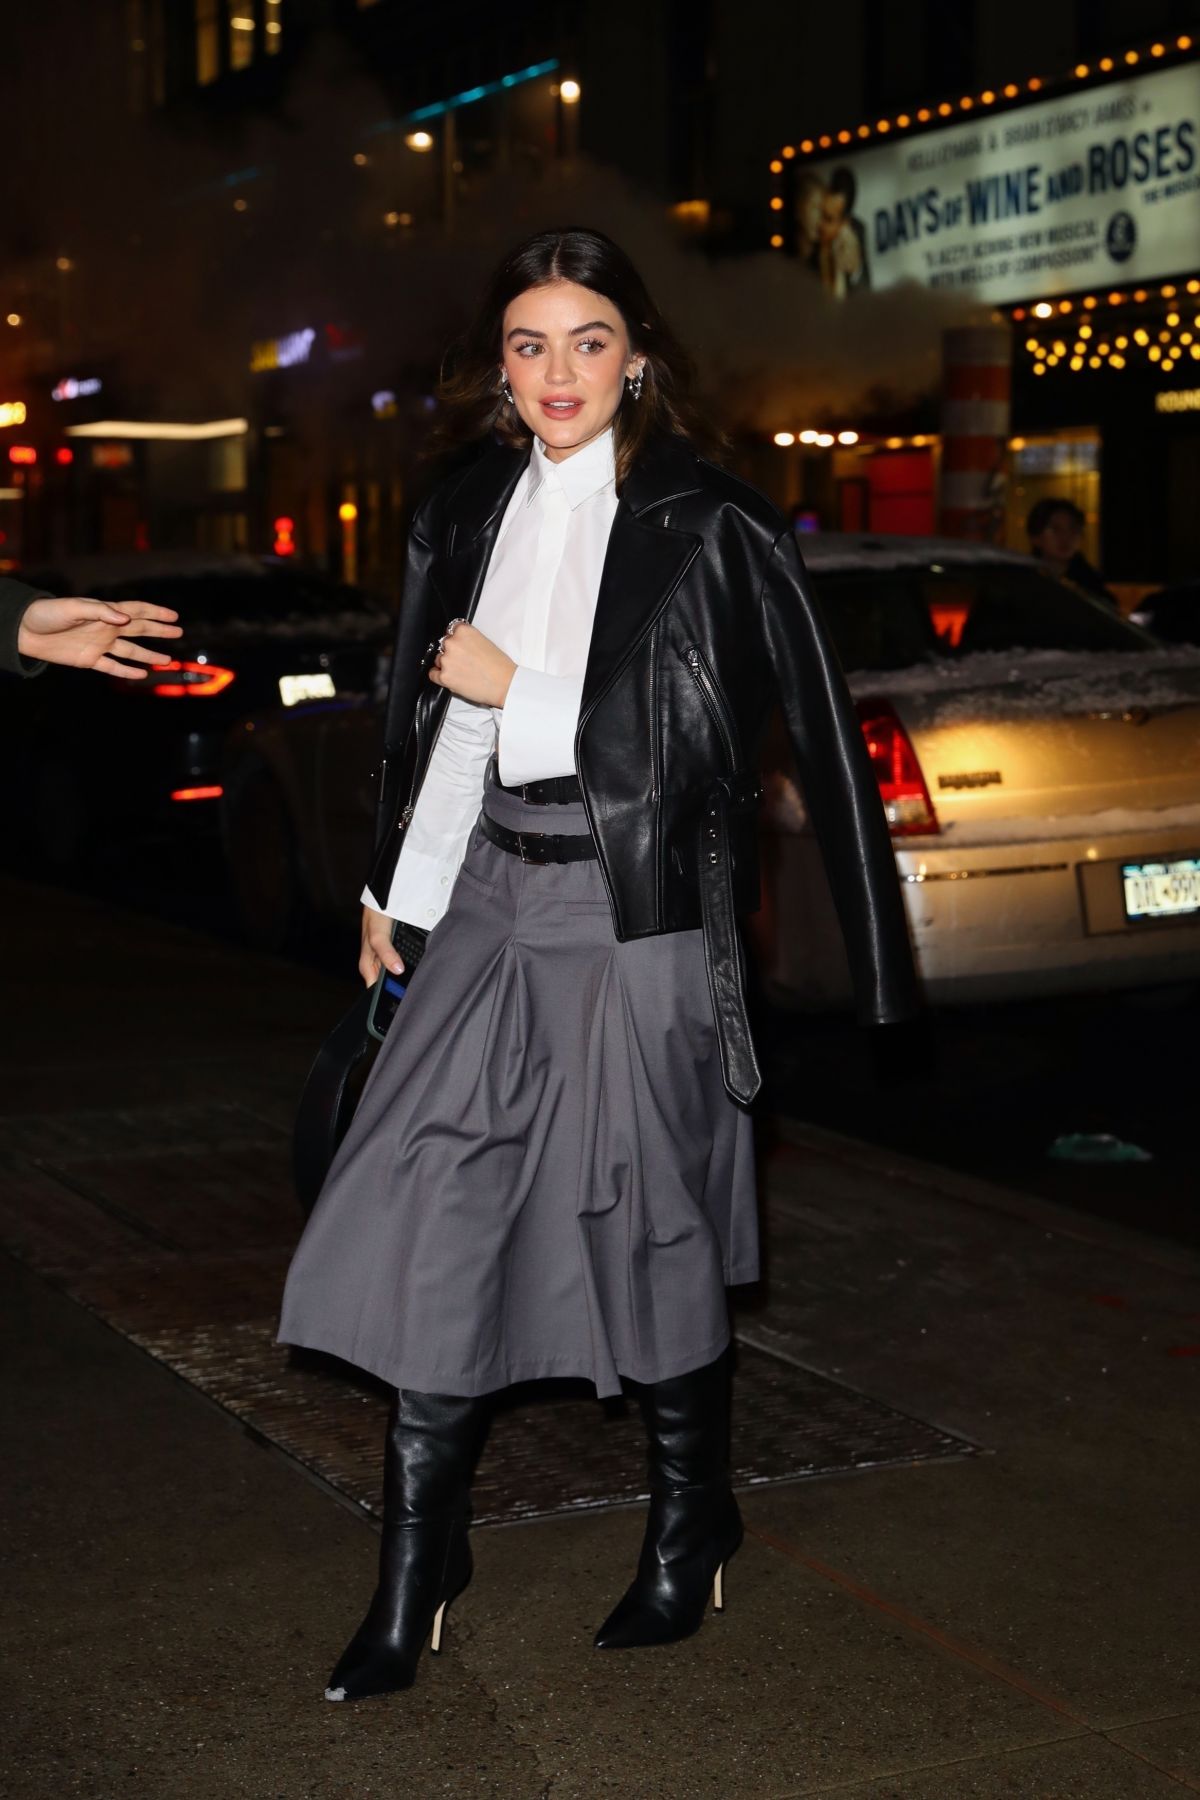 LUCY HALE Arrives at Which Brings Me to You Screening in New York 01/16 ...